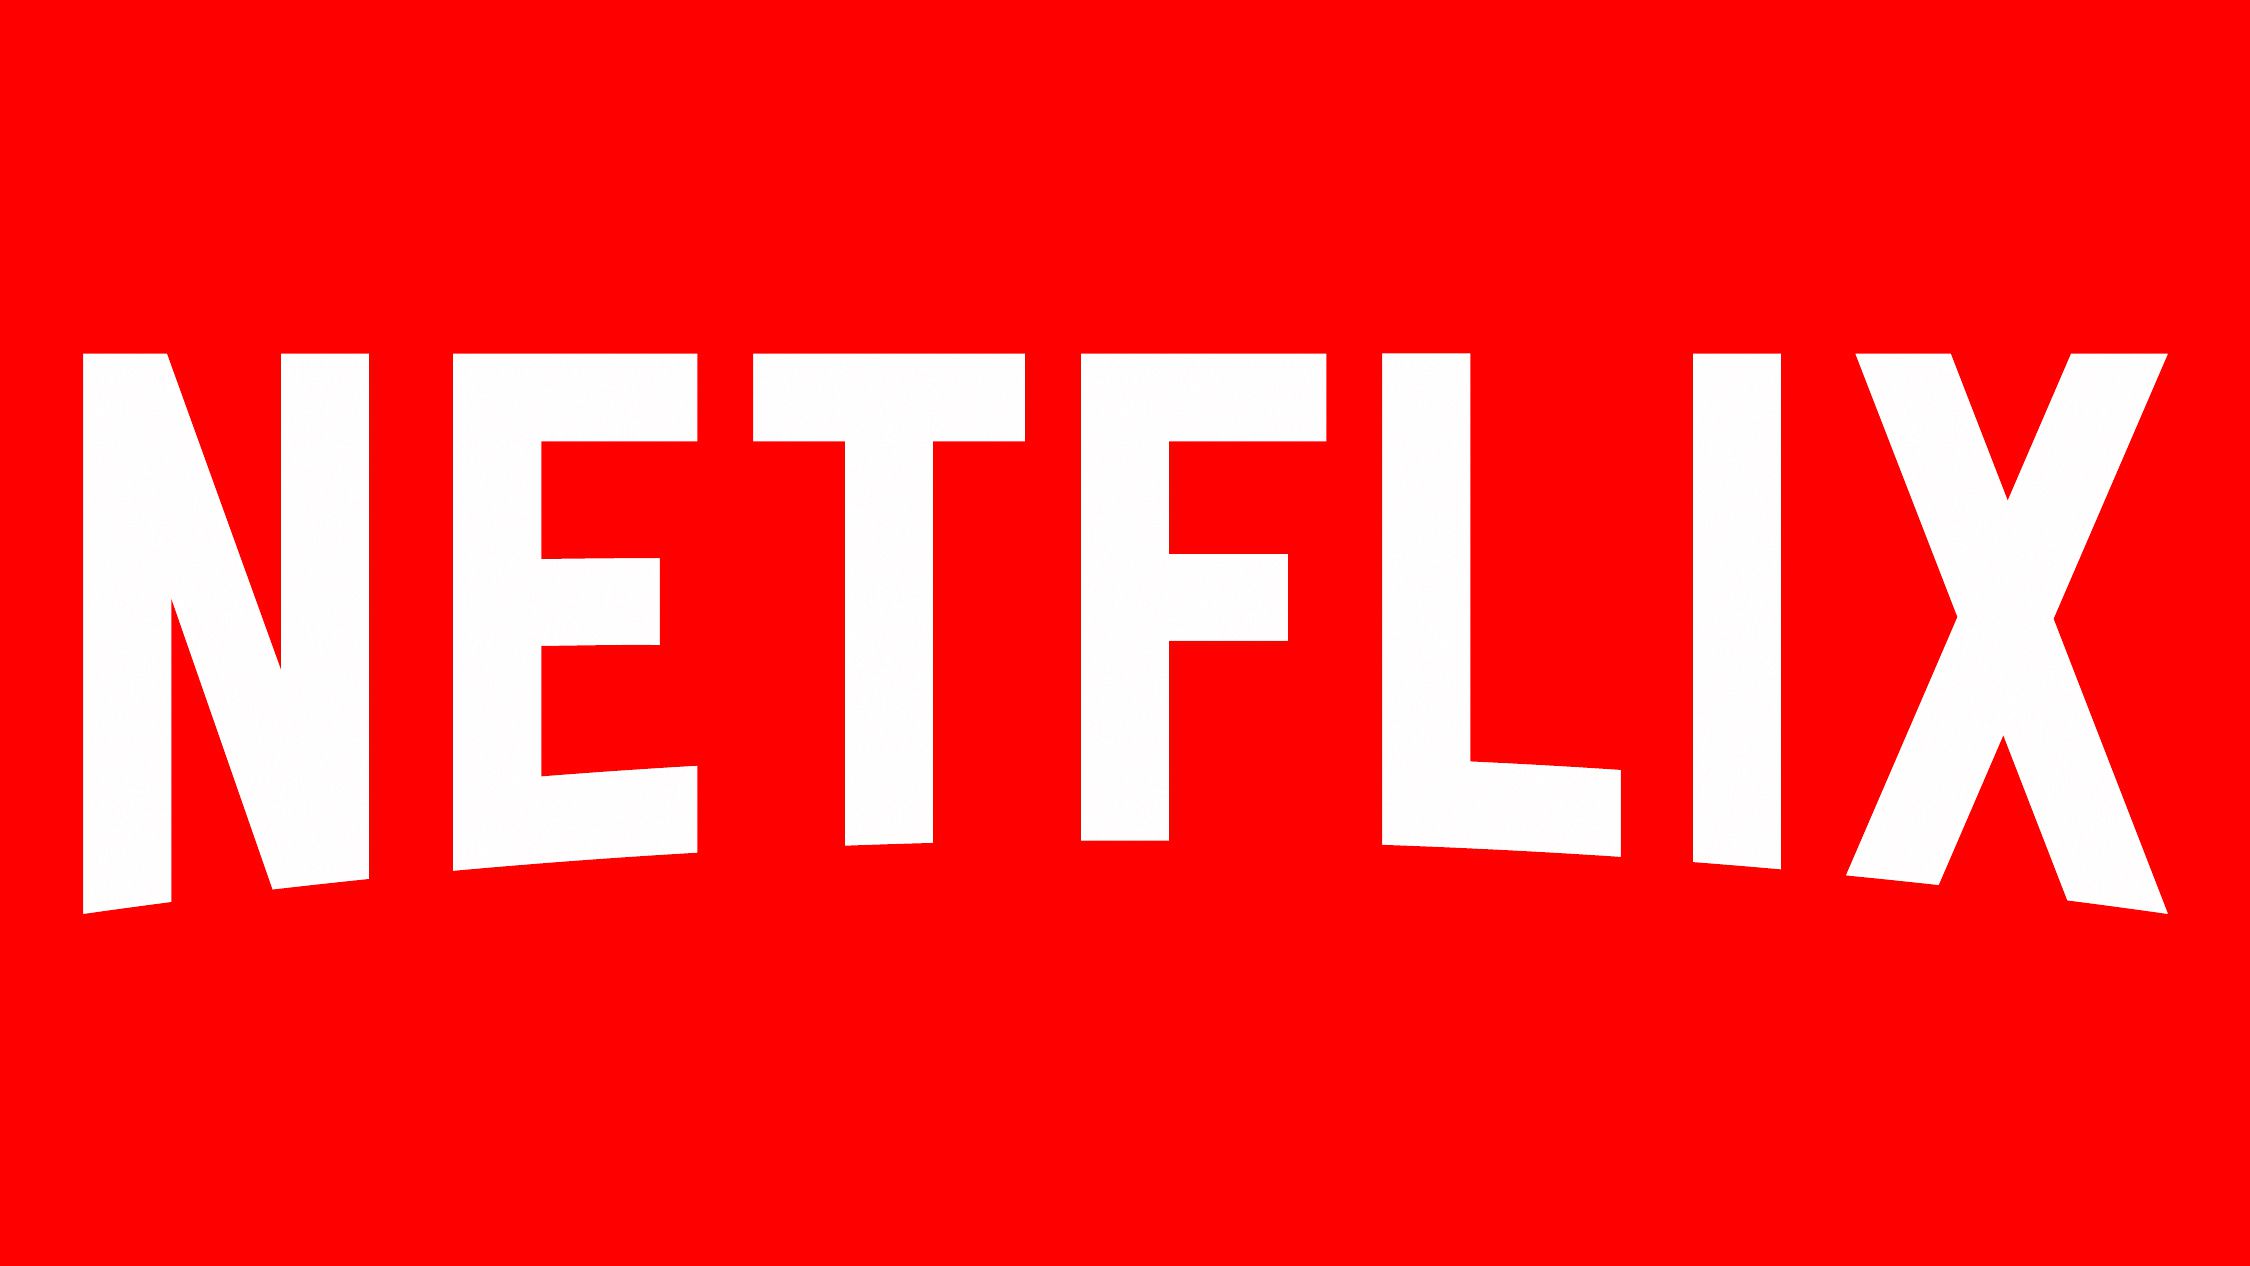 Netflix Co-CEO Confirms Plans for Cheaper Ad-Supported Netflix Tier - macrumors.com